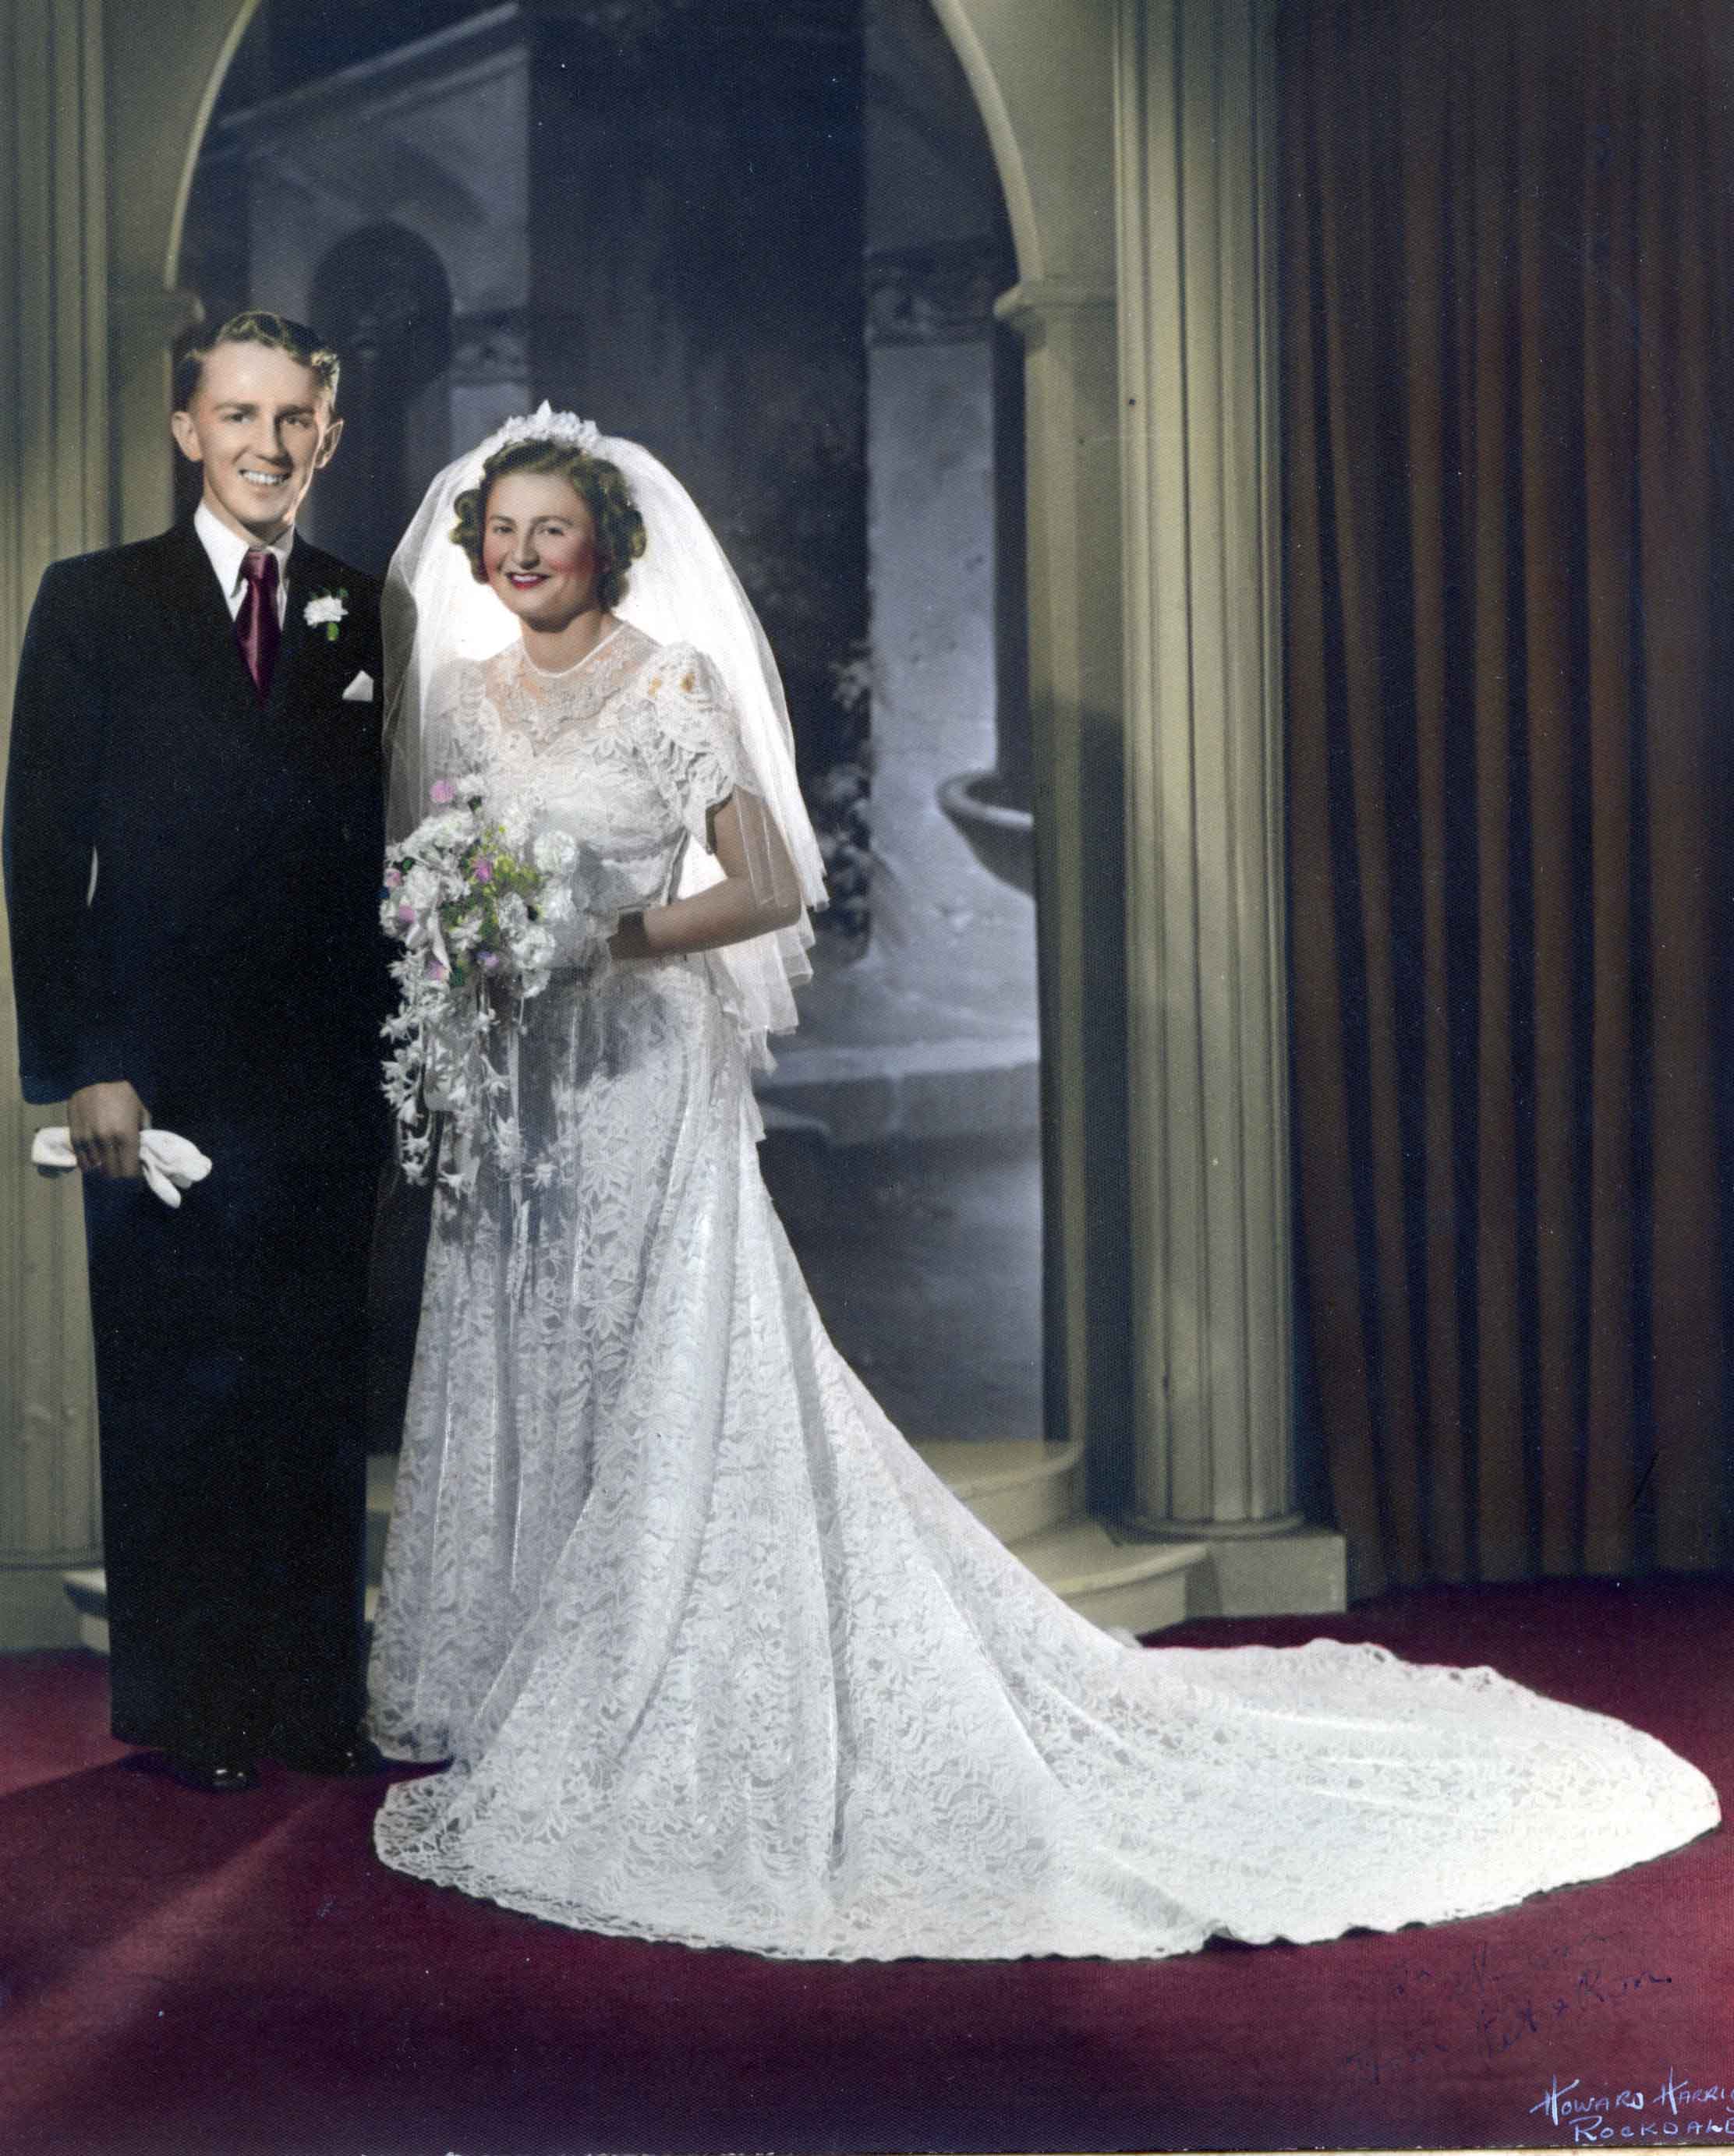 Ron and Patricia Russell, June 6 1953